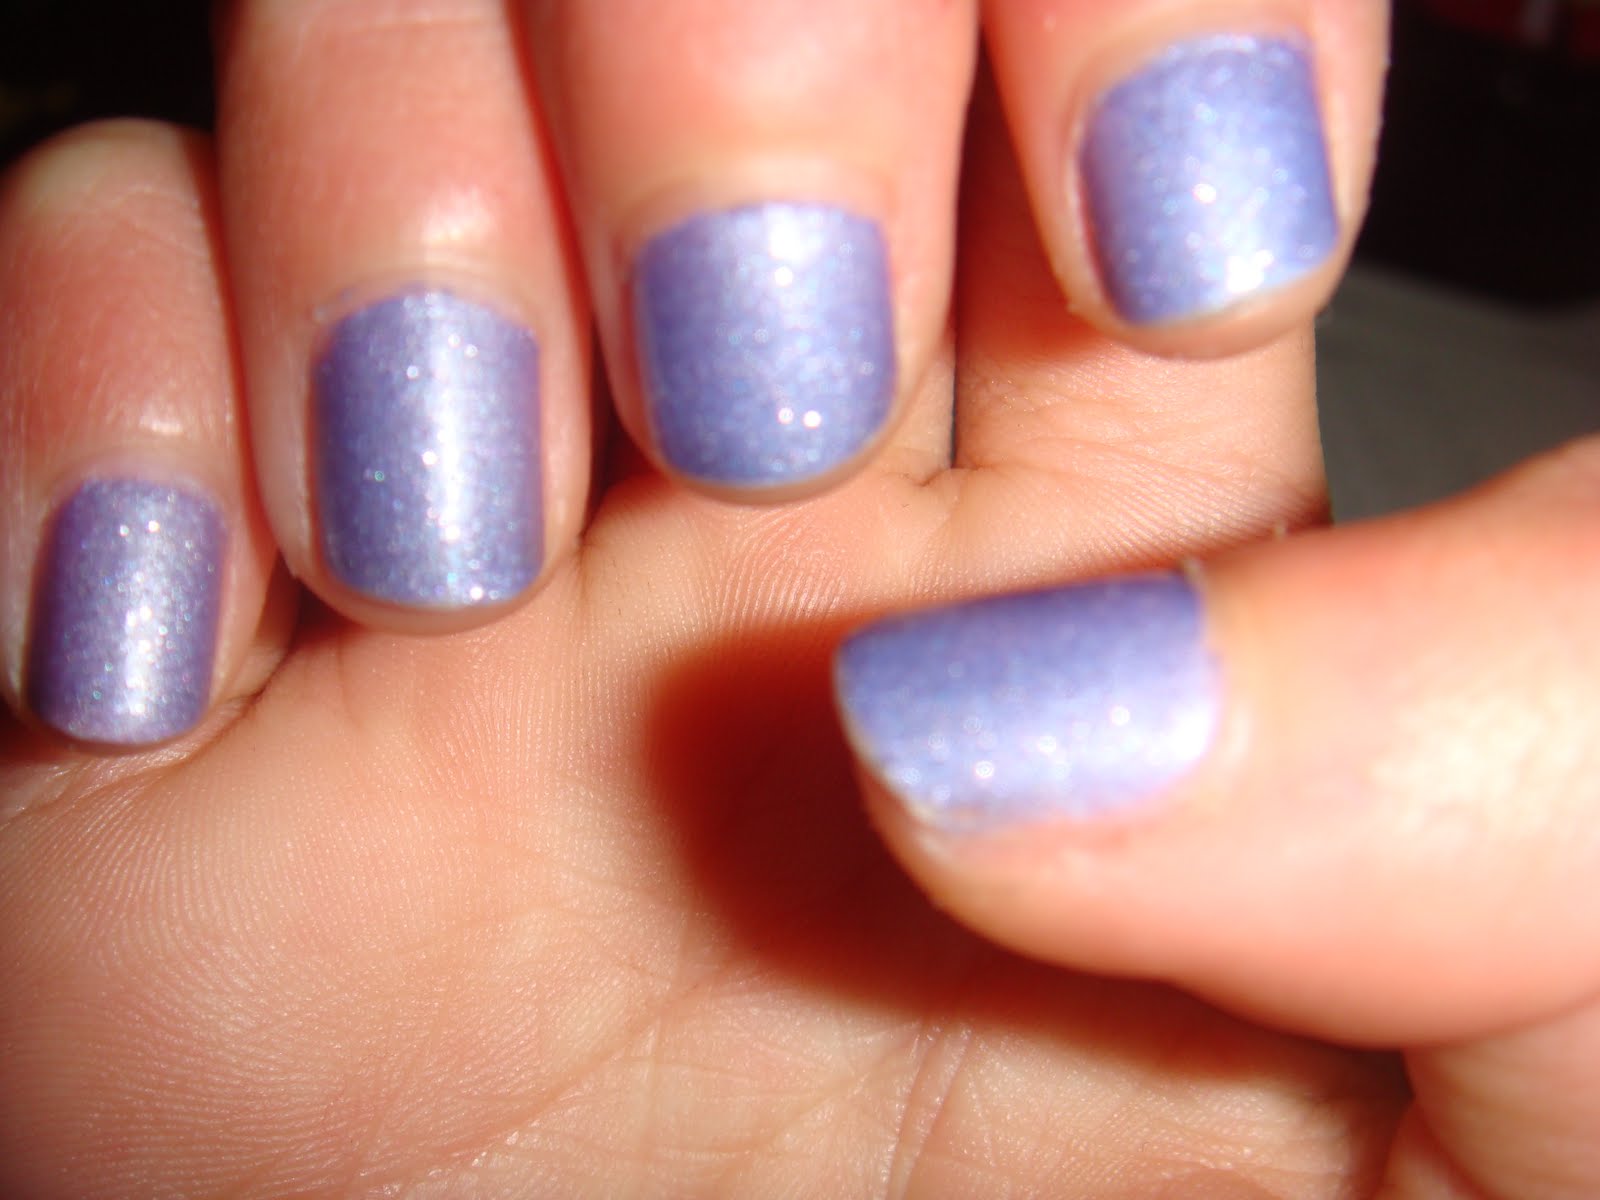 3. How Does Color-Changing Nail Polish Work? - wide 9